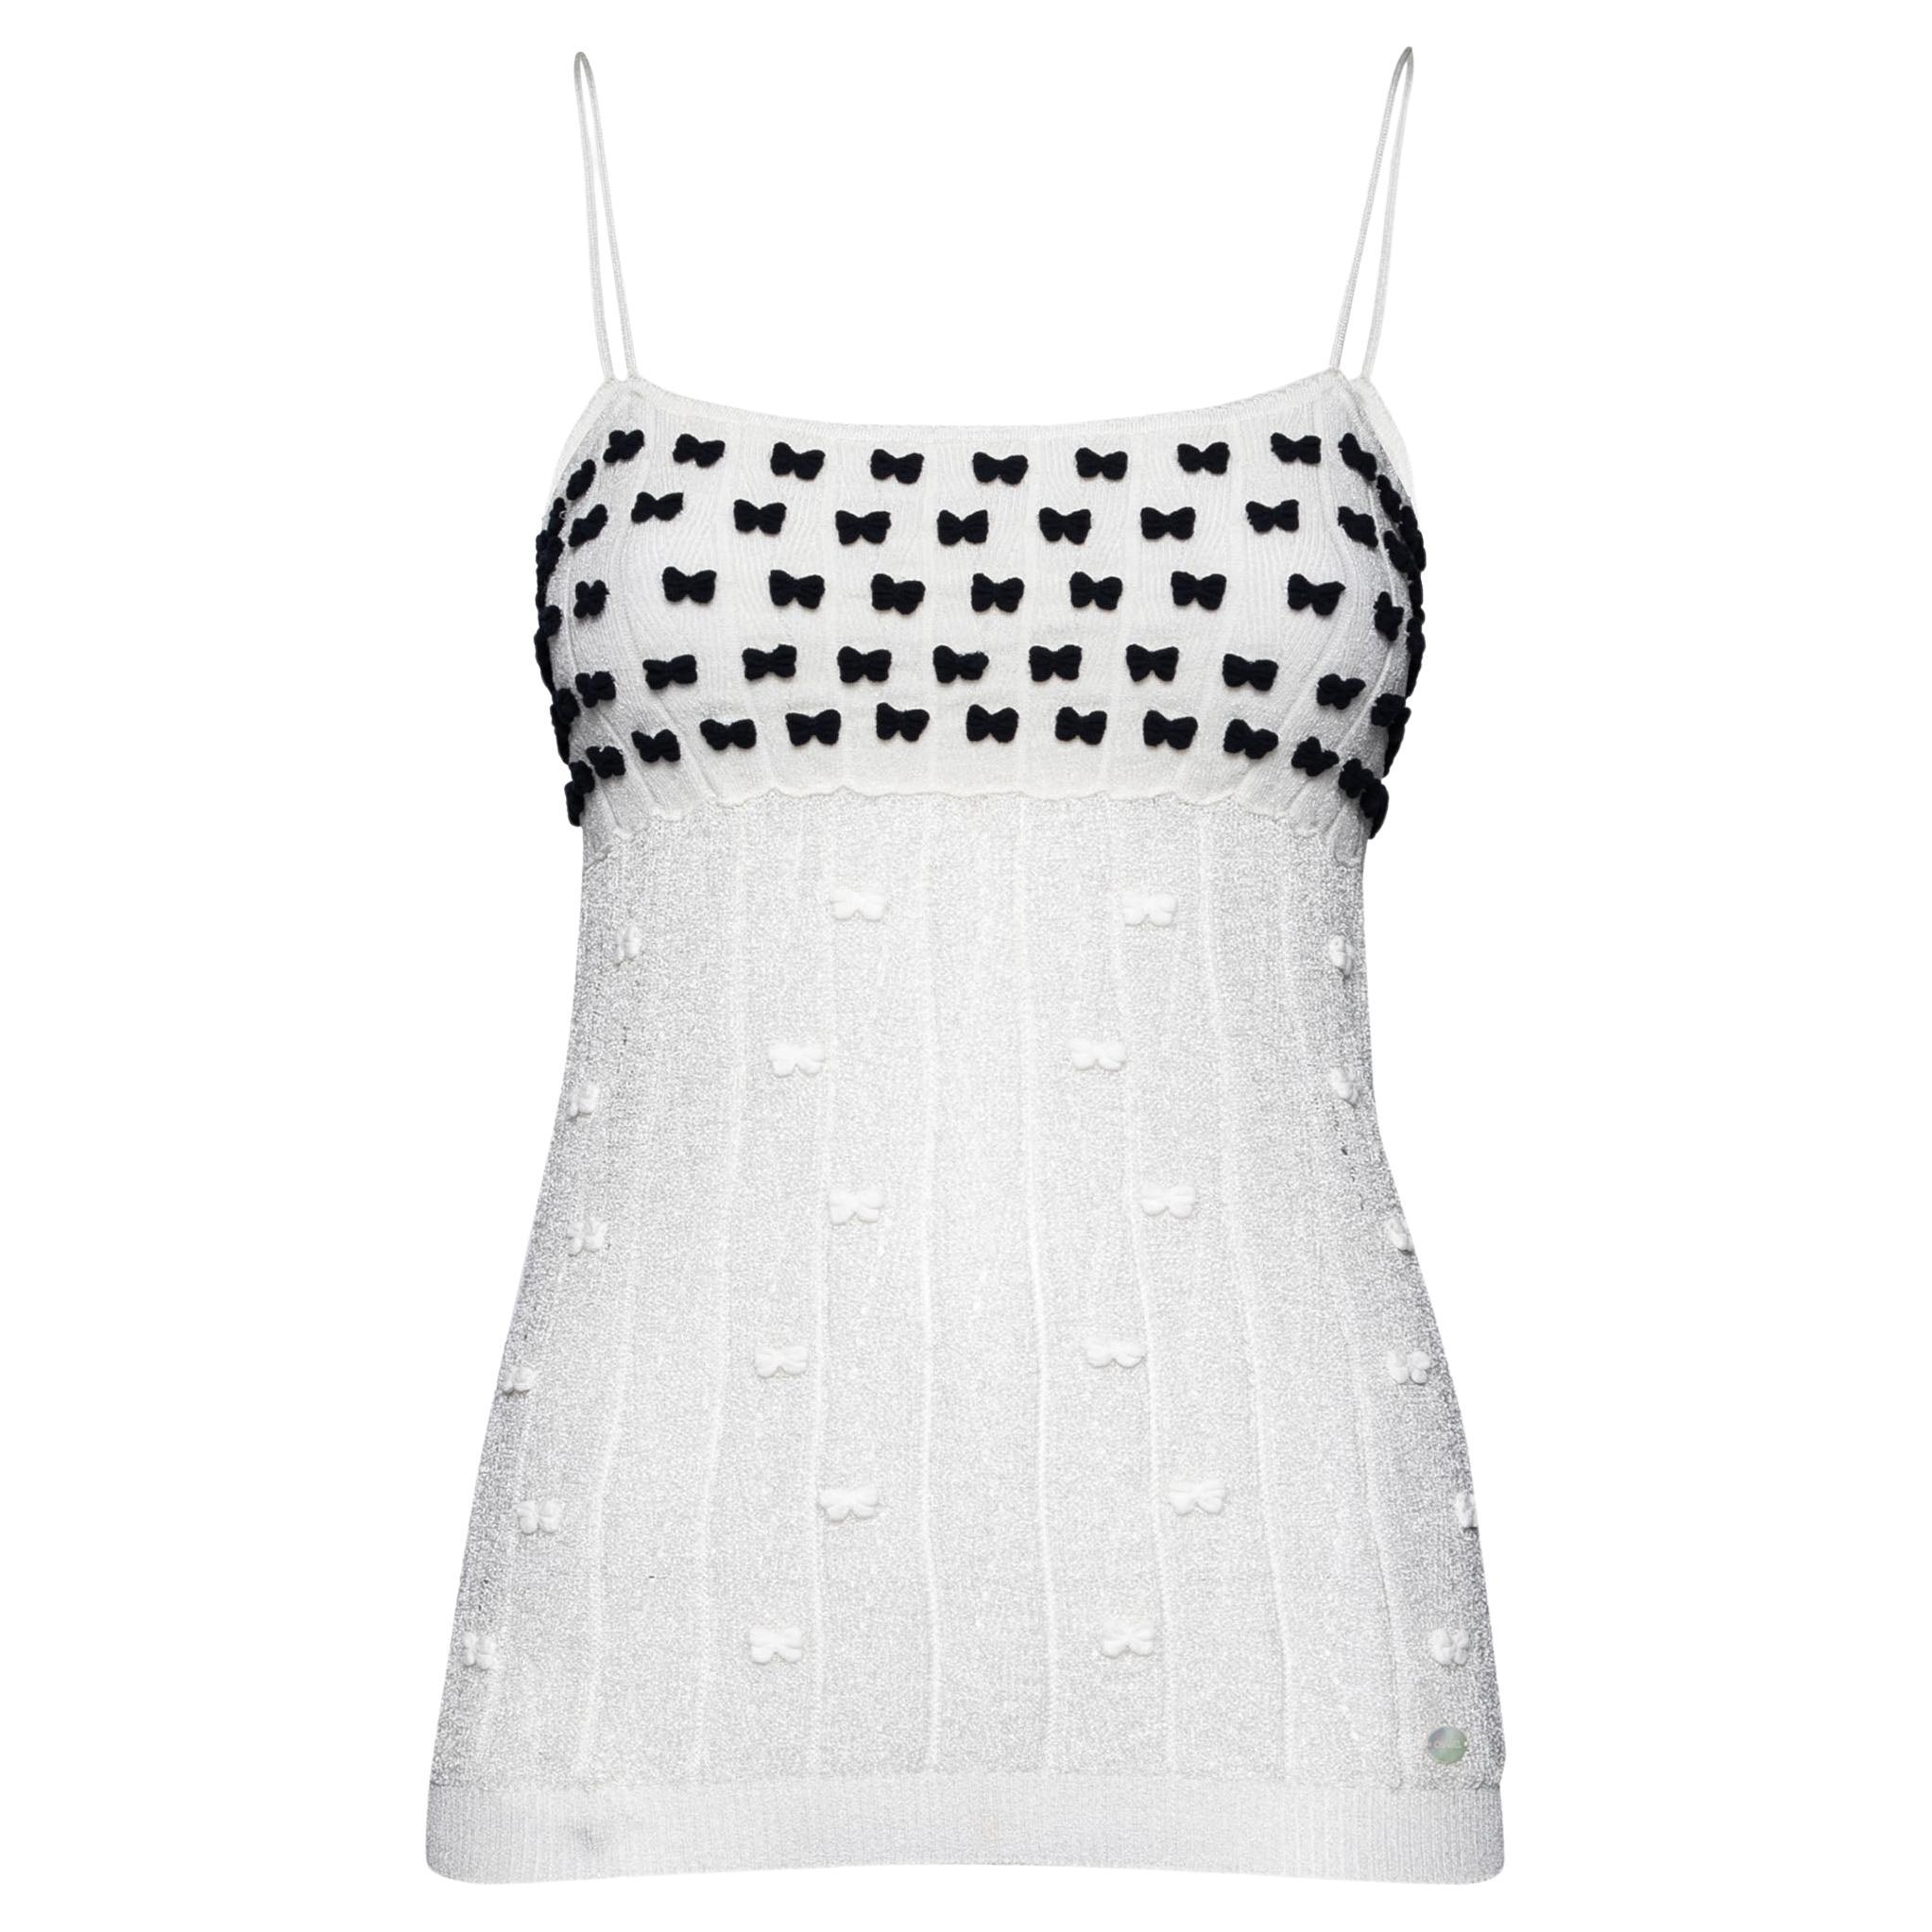 Chanel White Perforated Knit Bow Appliqued Sleeveless Top L